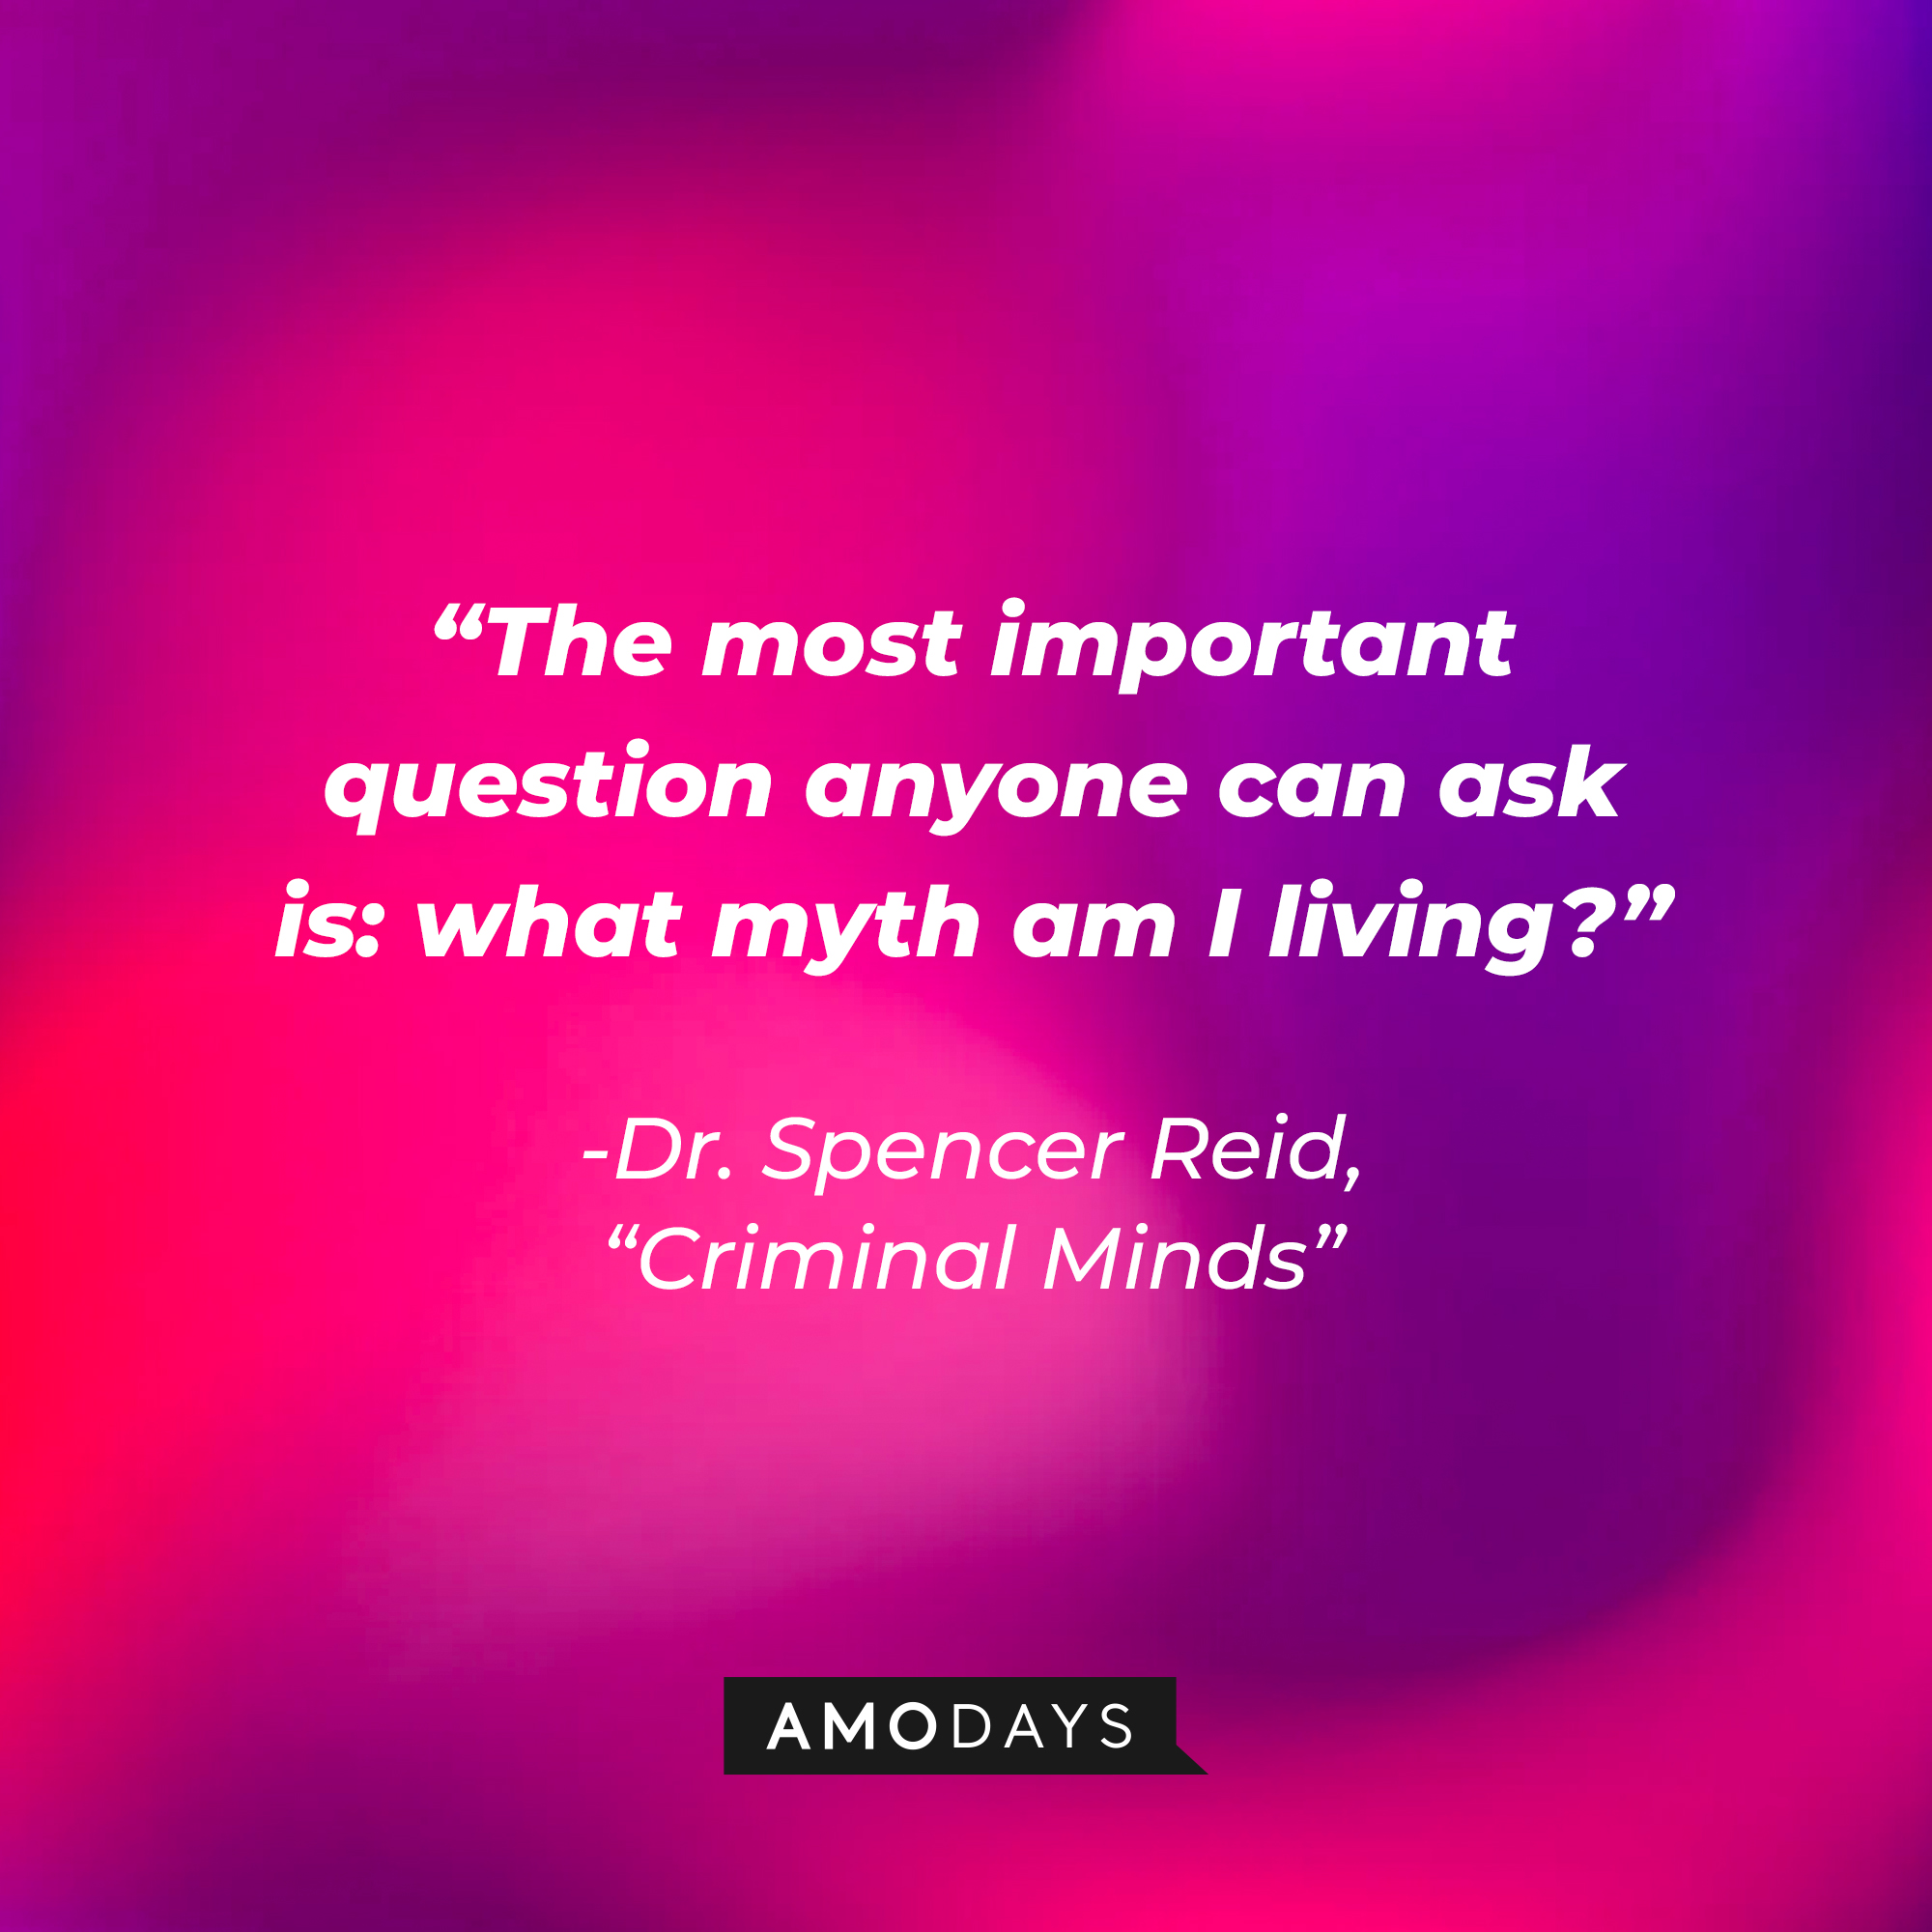 Dr. Spencer Reid's quote: “The most important question anyone can ask is: what myth am I living?” | Source: Amodays